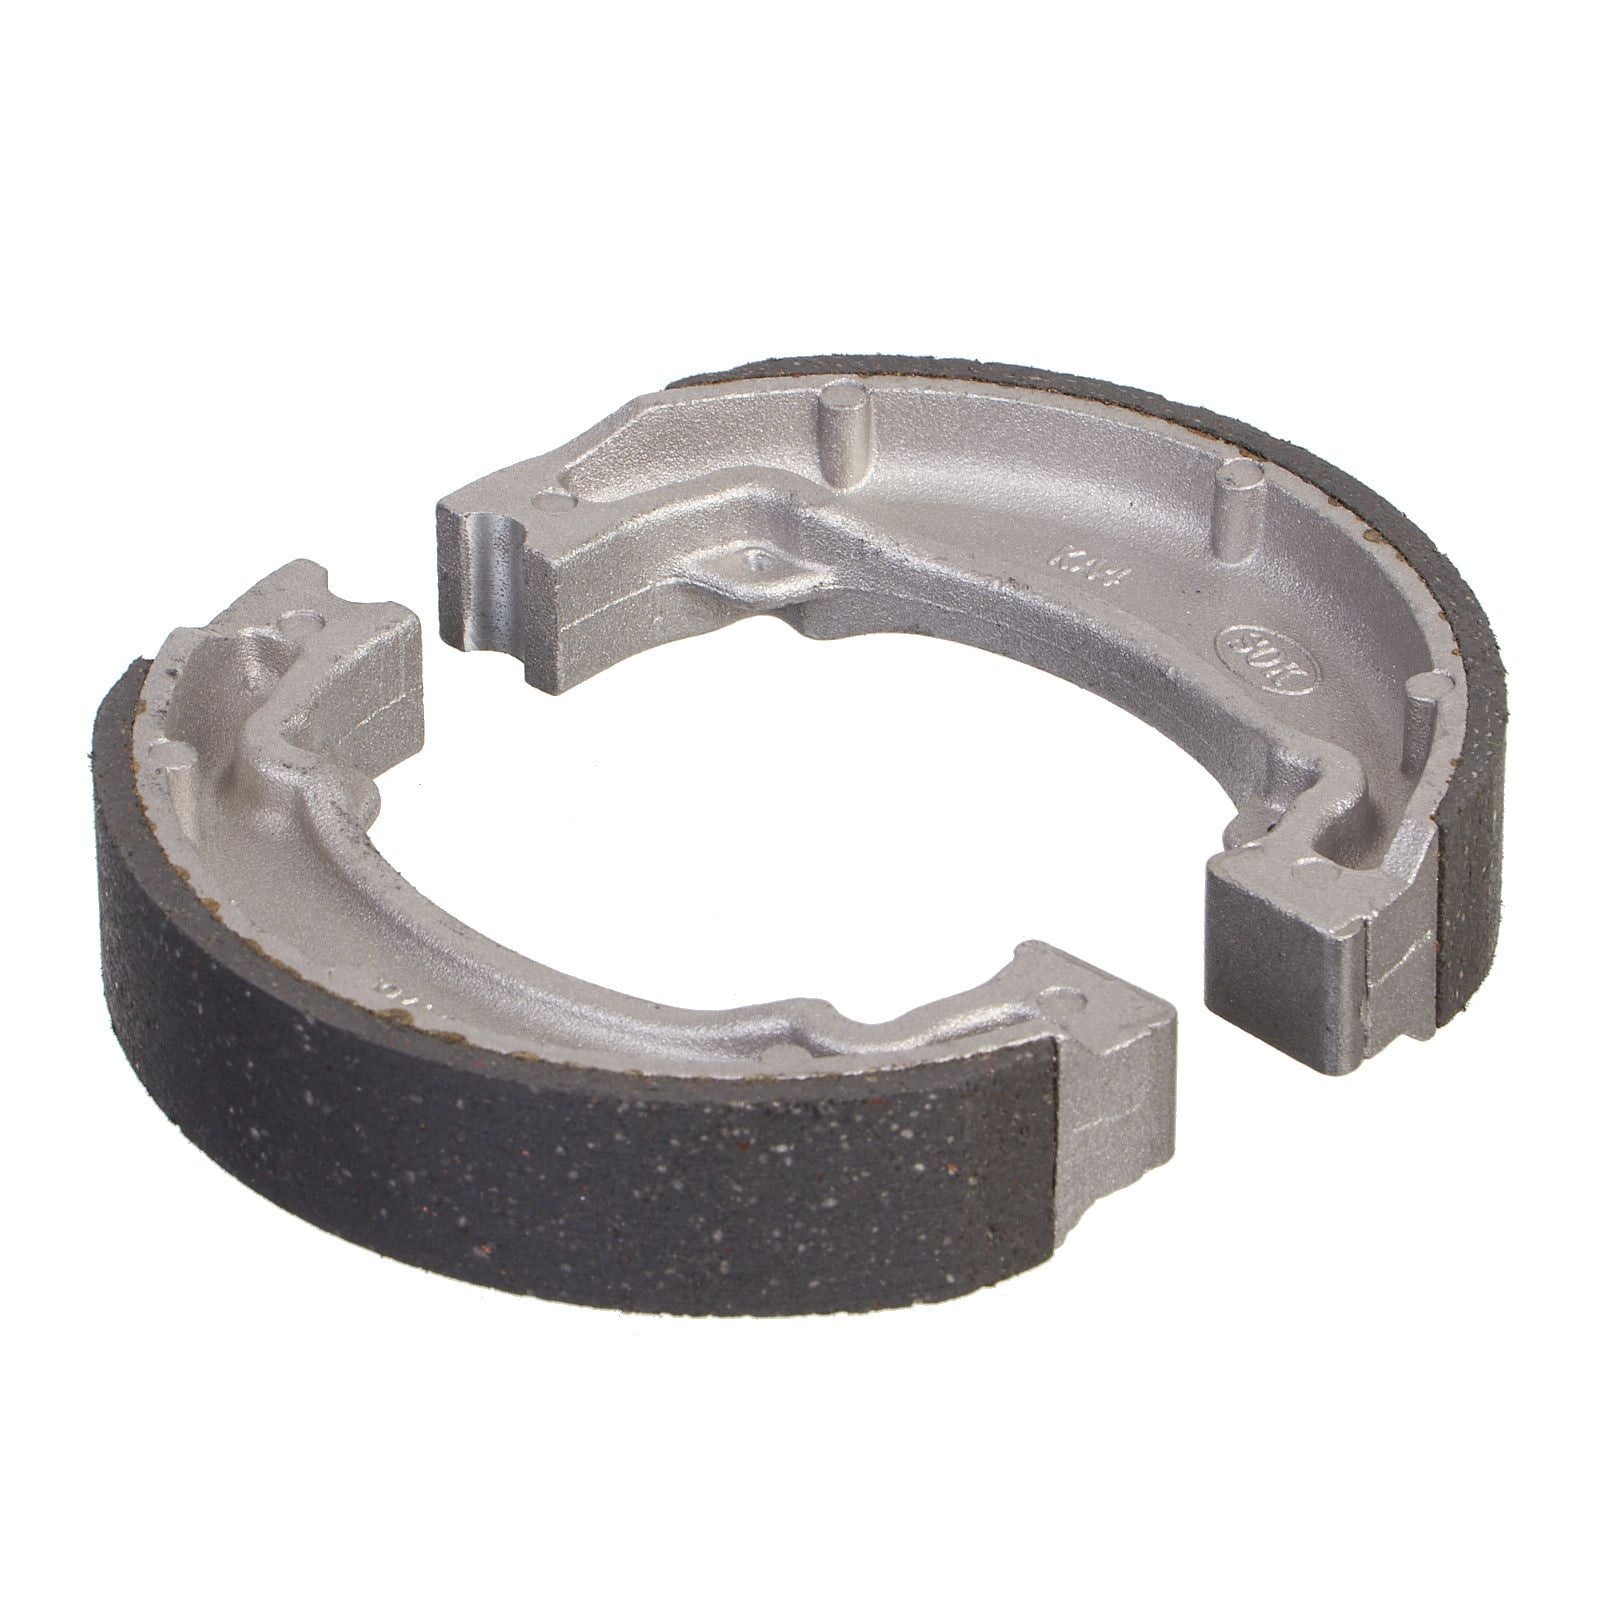 New WHITES Motorcycle Brake Shoes #WPBS39120